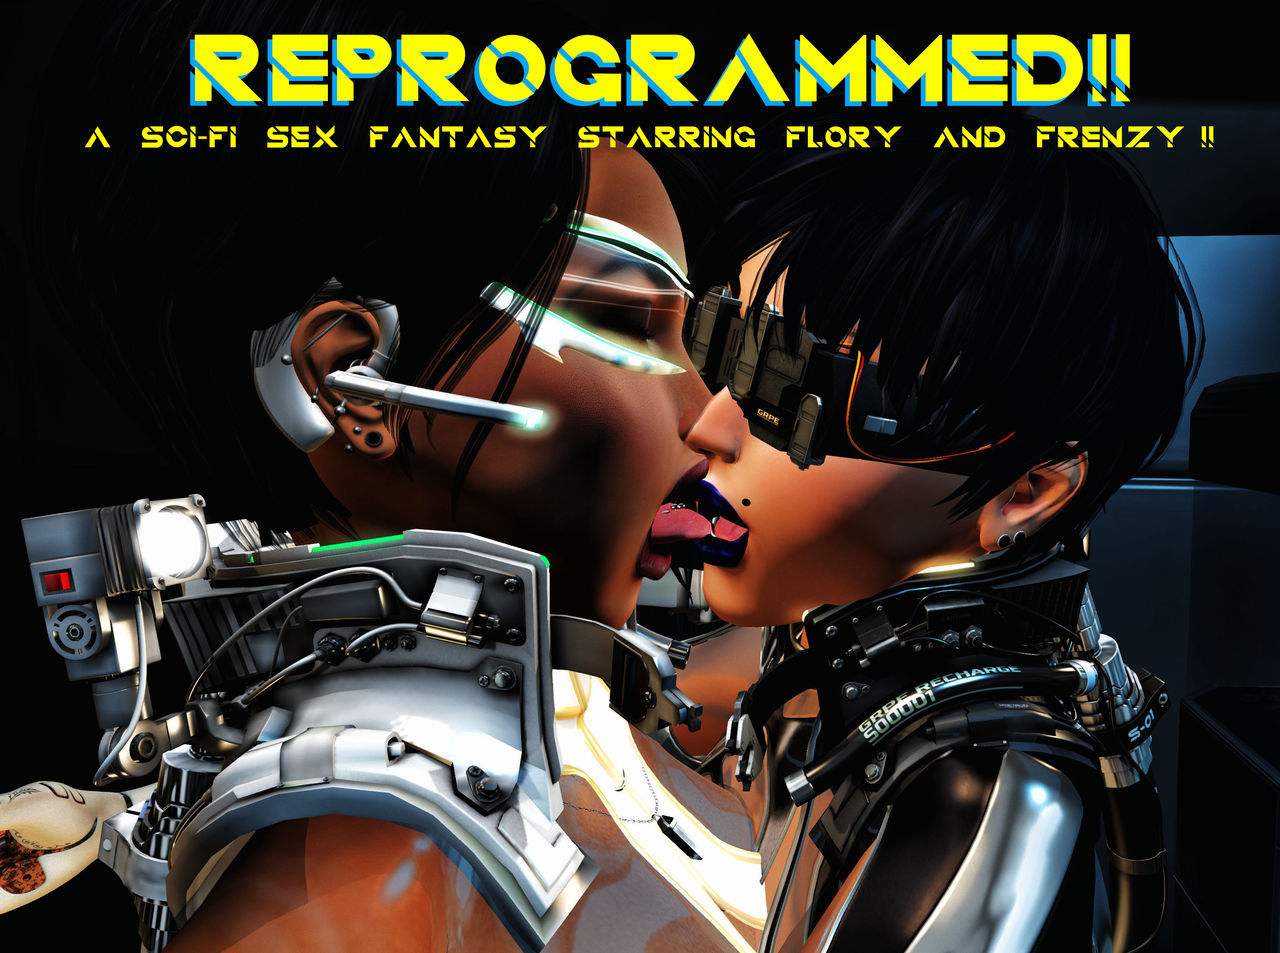 Reprogrammed - Frenzy in SL page 1